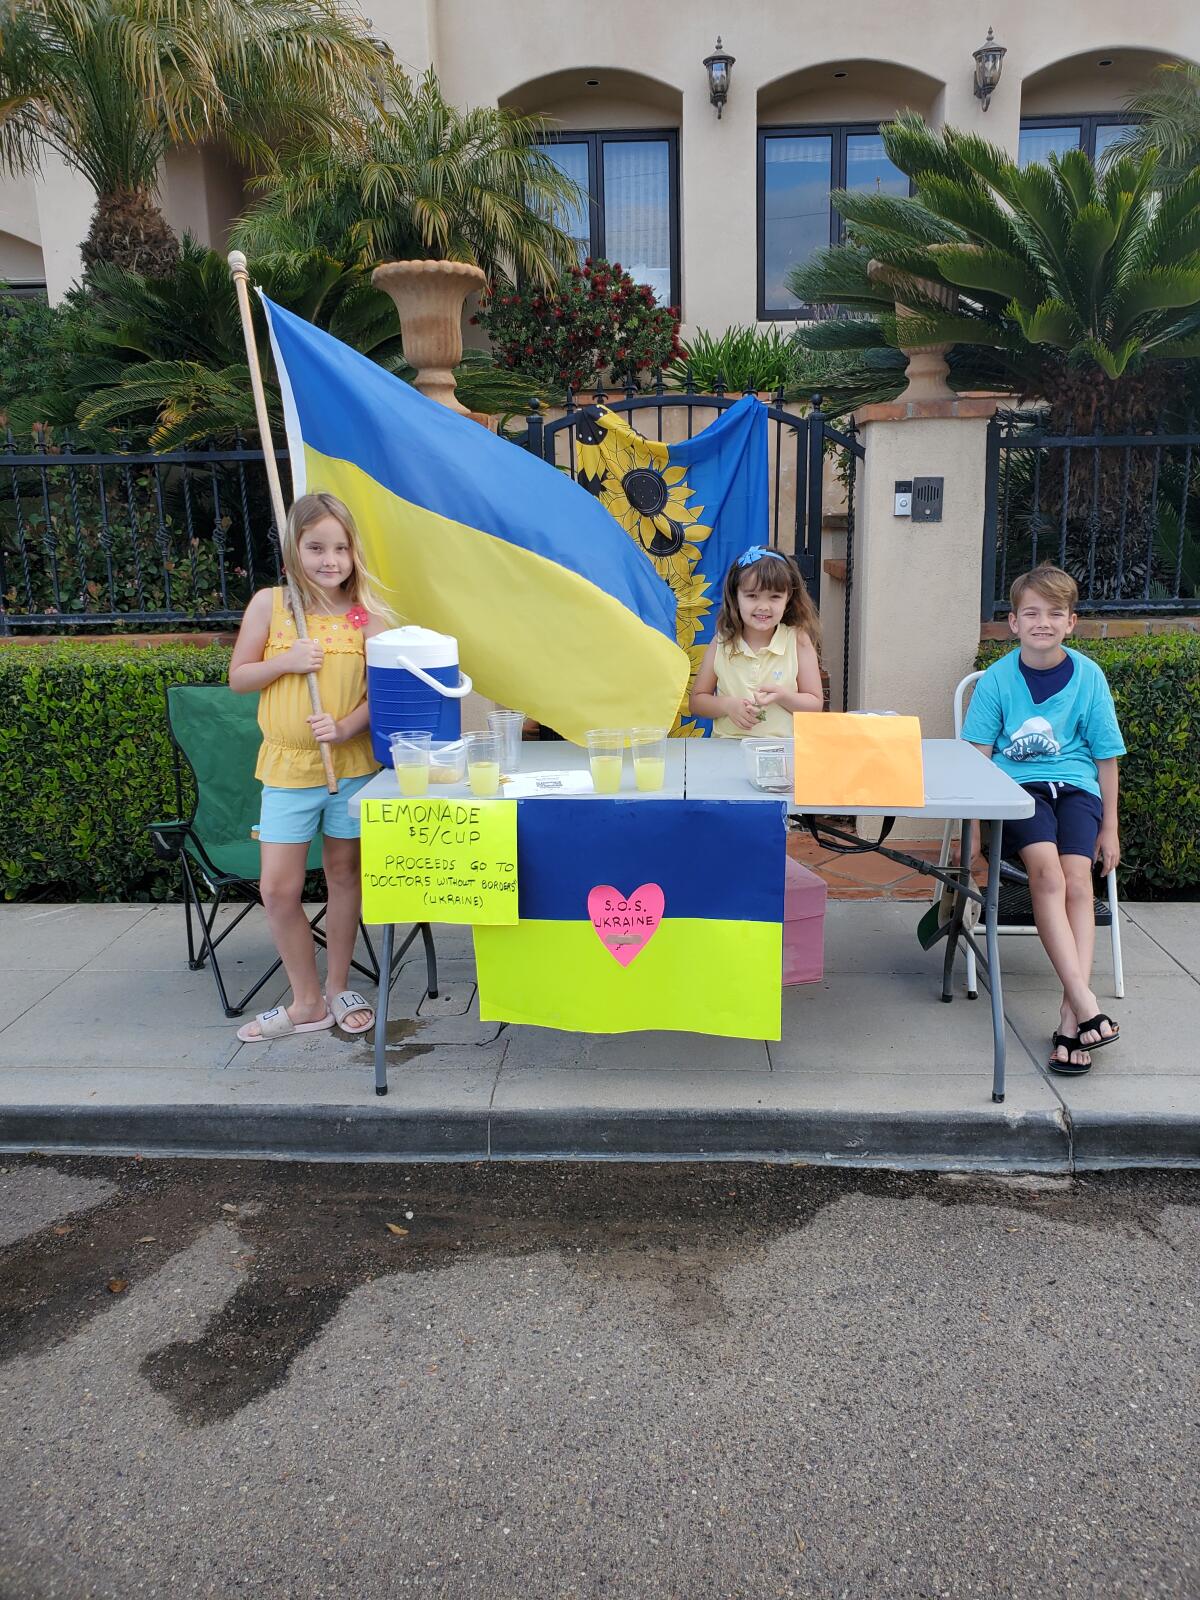 Mary Grace, Anne and Matthew Stuart-Chaffoo staff their lemonade stand to raise money for Doctors Without Borders in Ukraine.